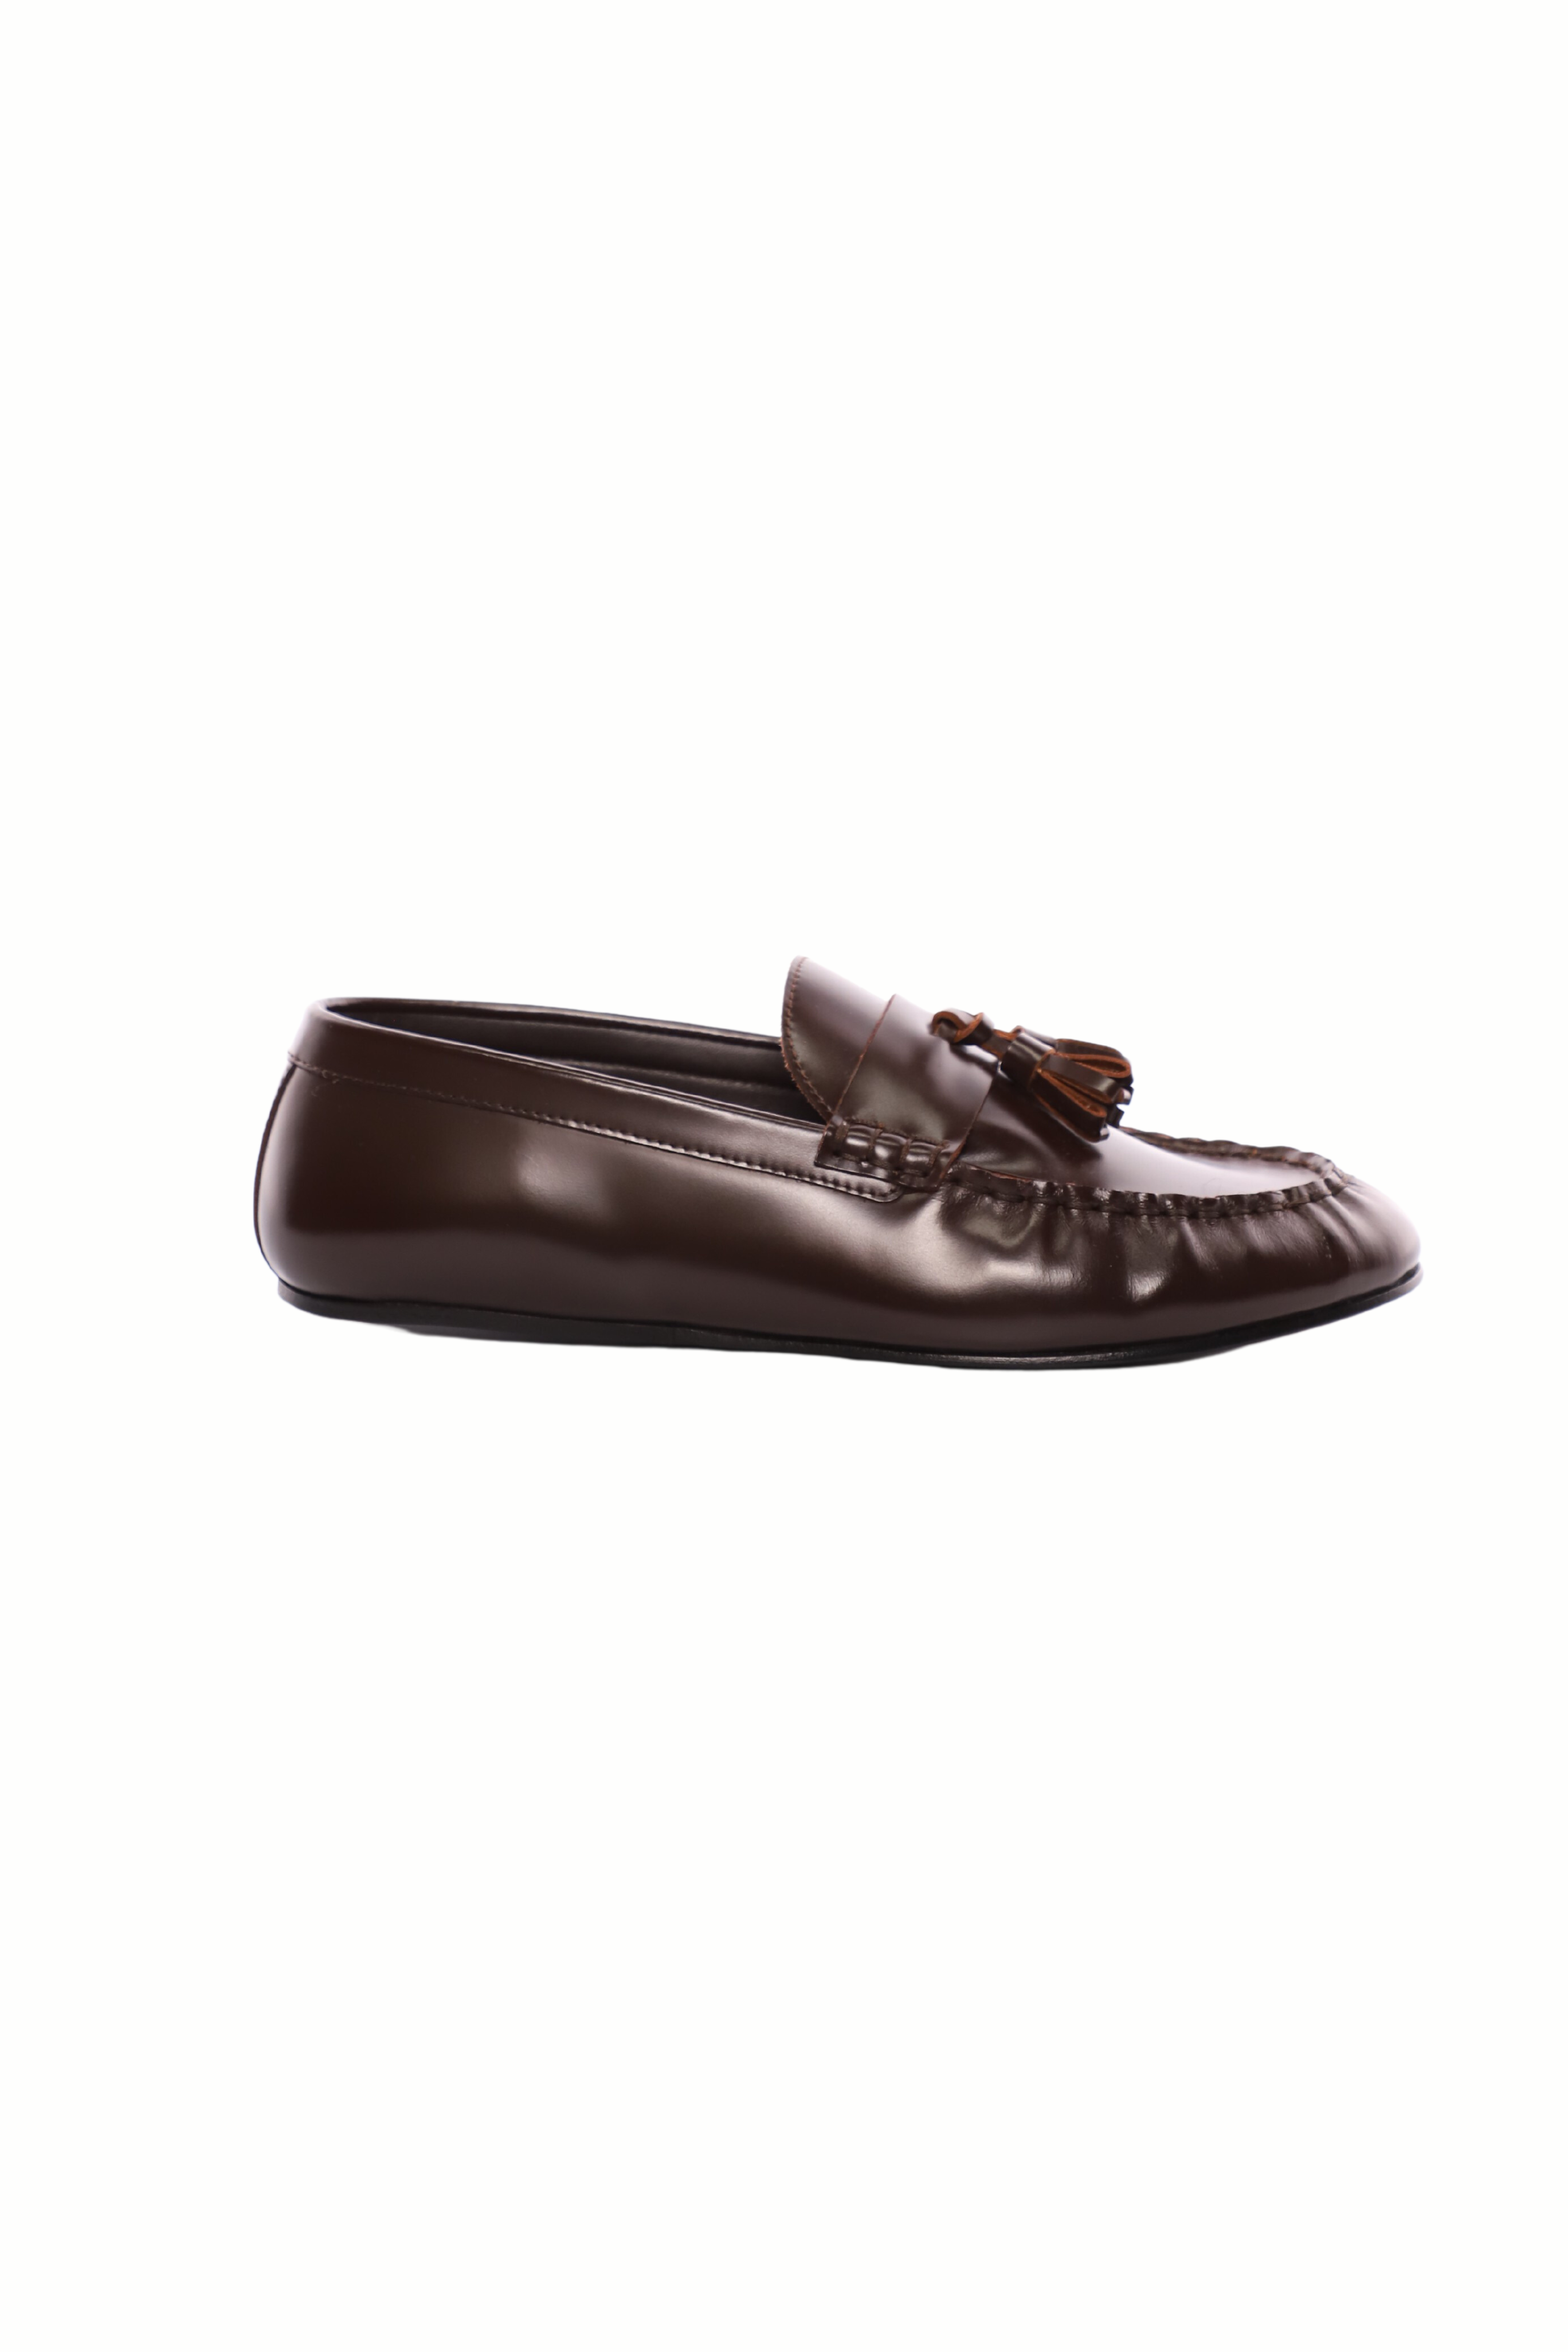 THE ROW Men's Brown Loafers